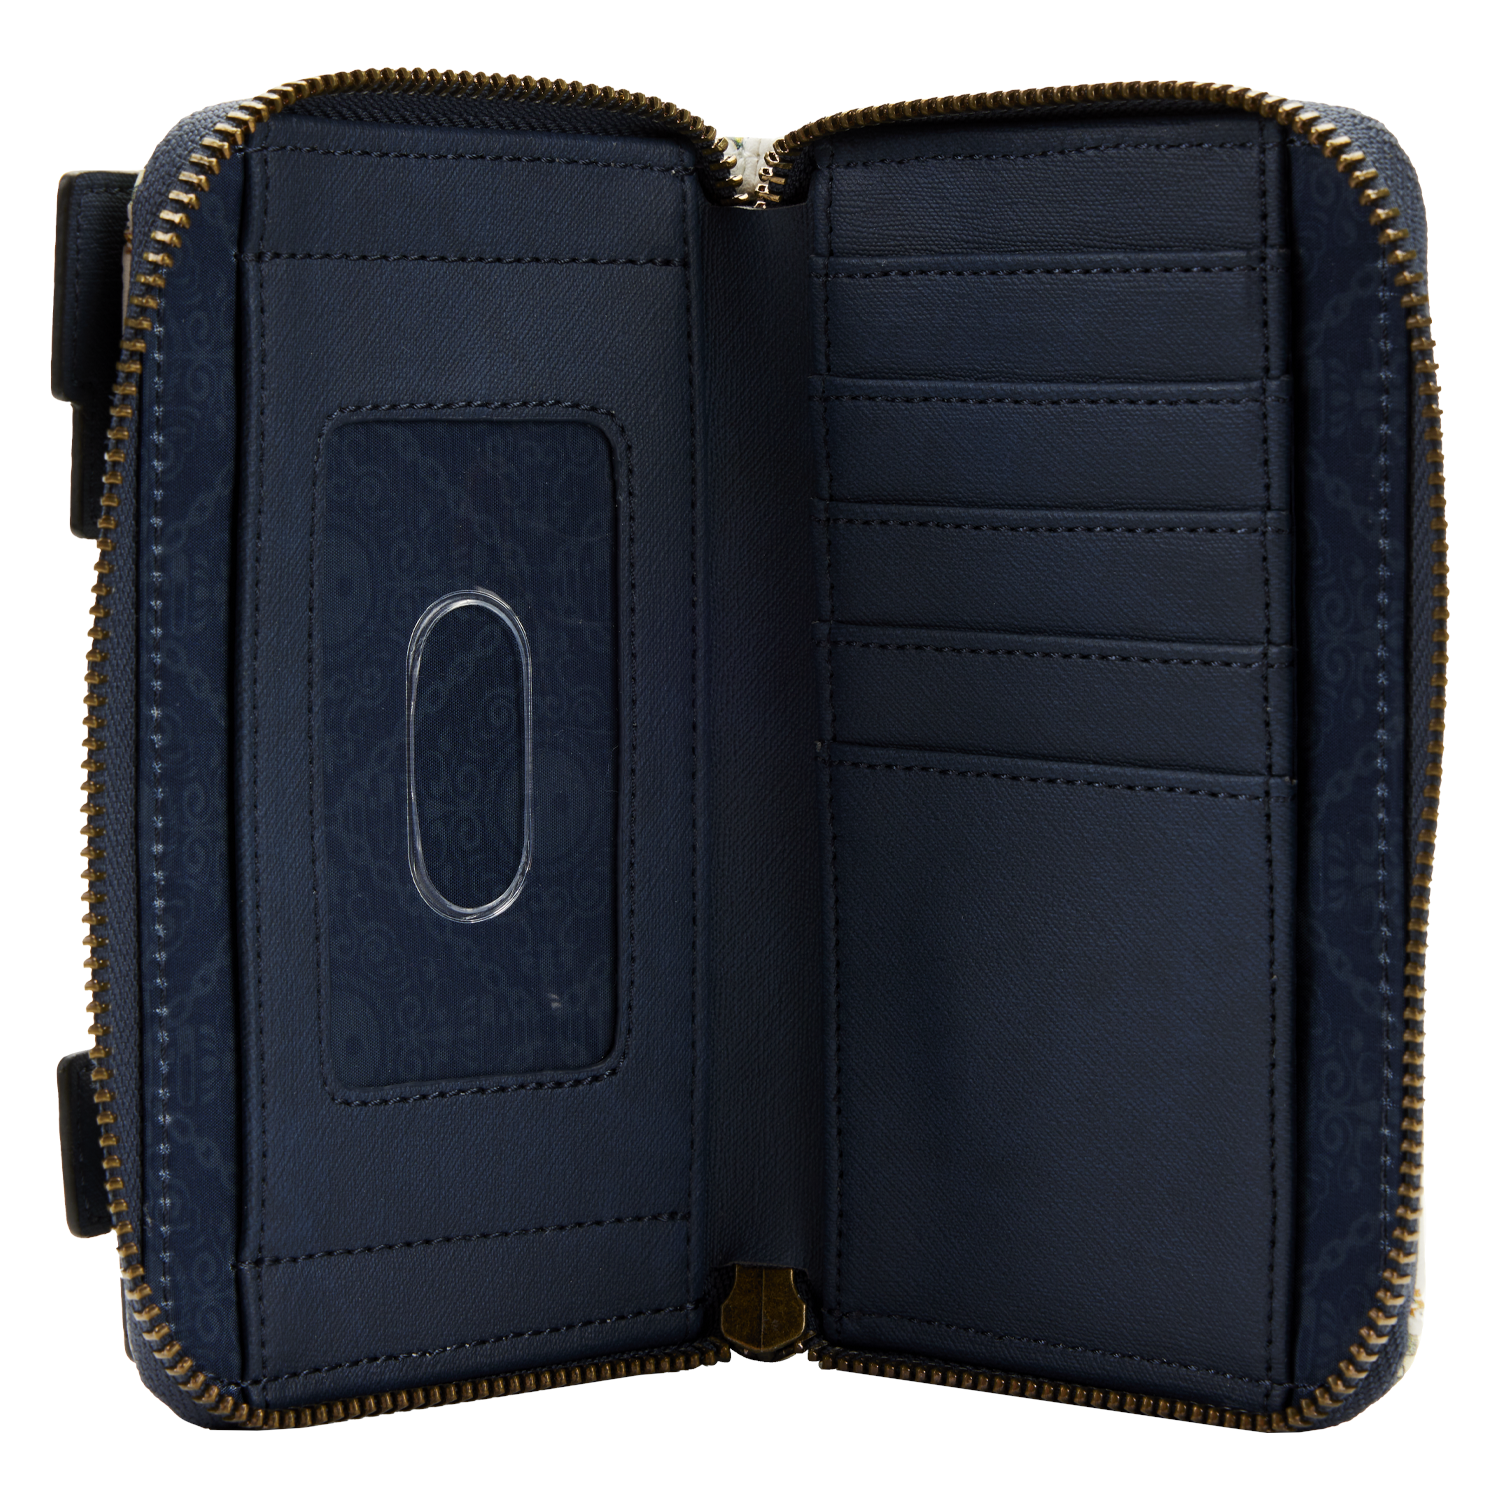 The wallet contains five slots for cards and a clear compartment to hold an ID.